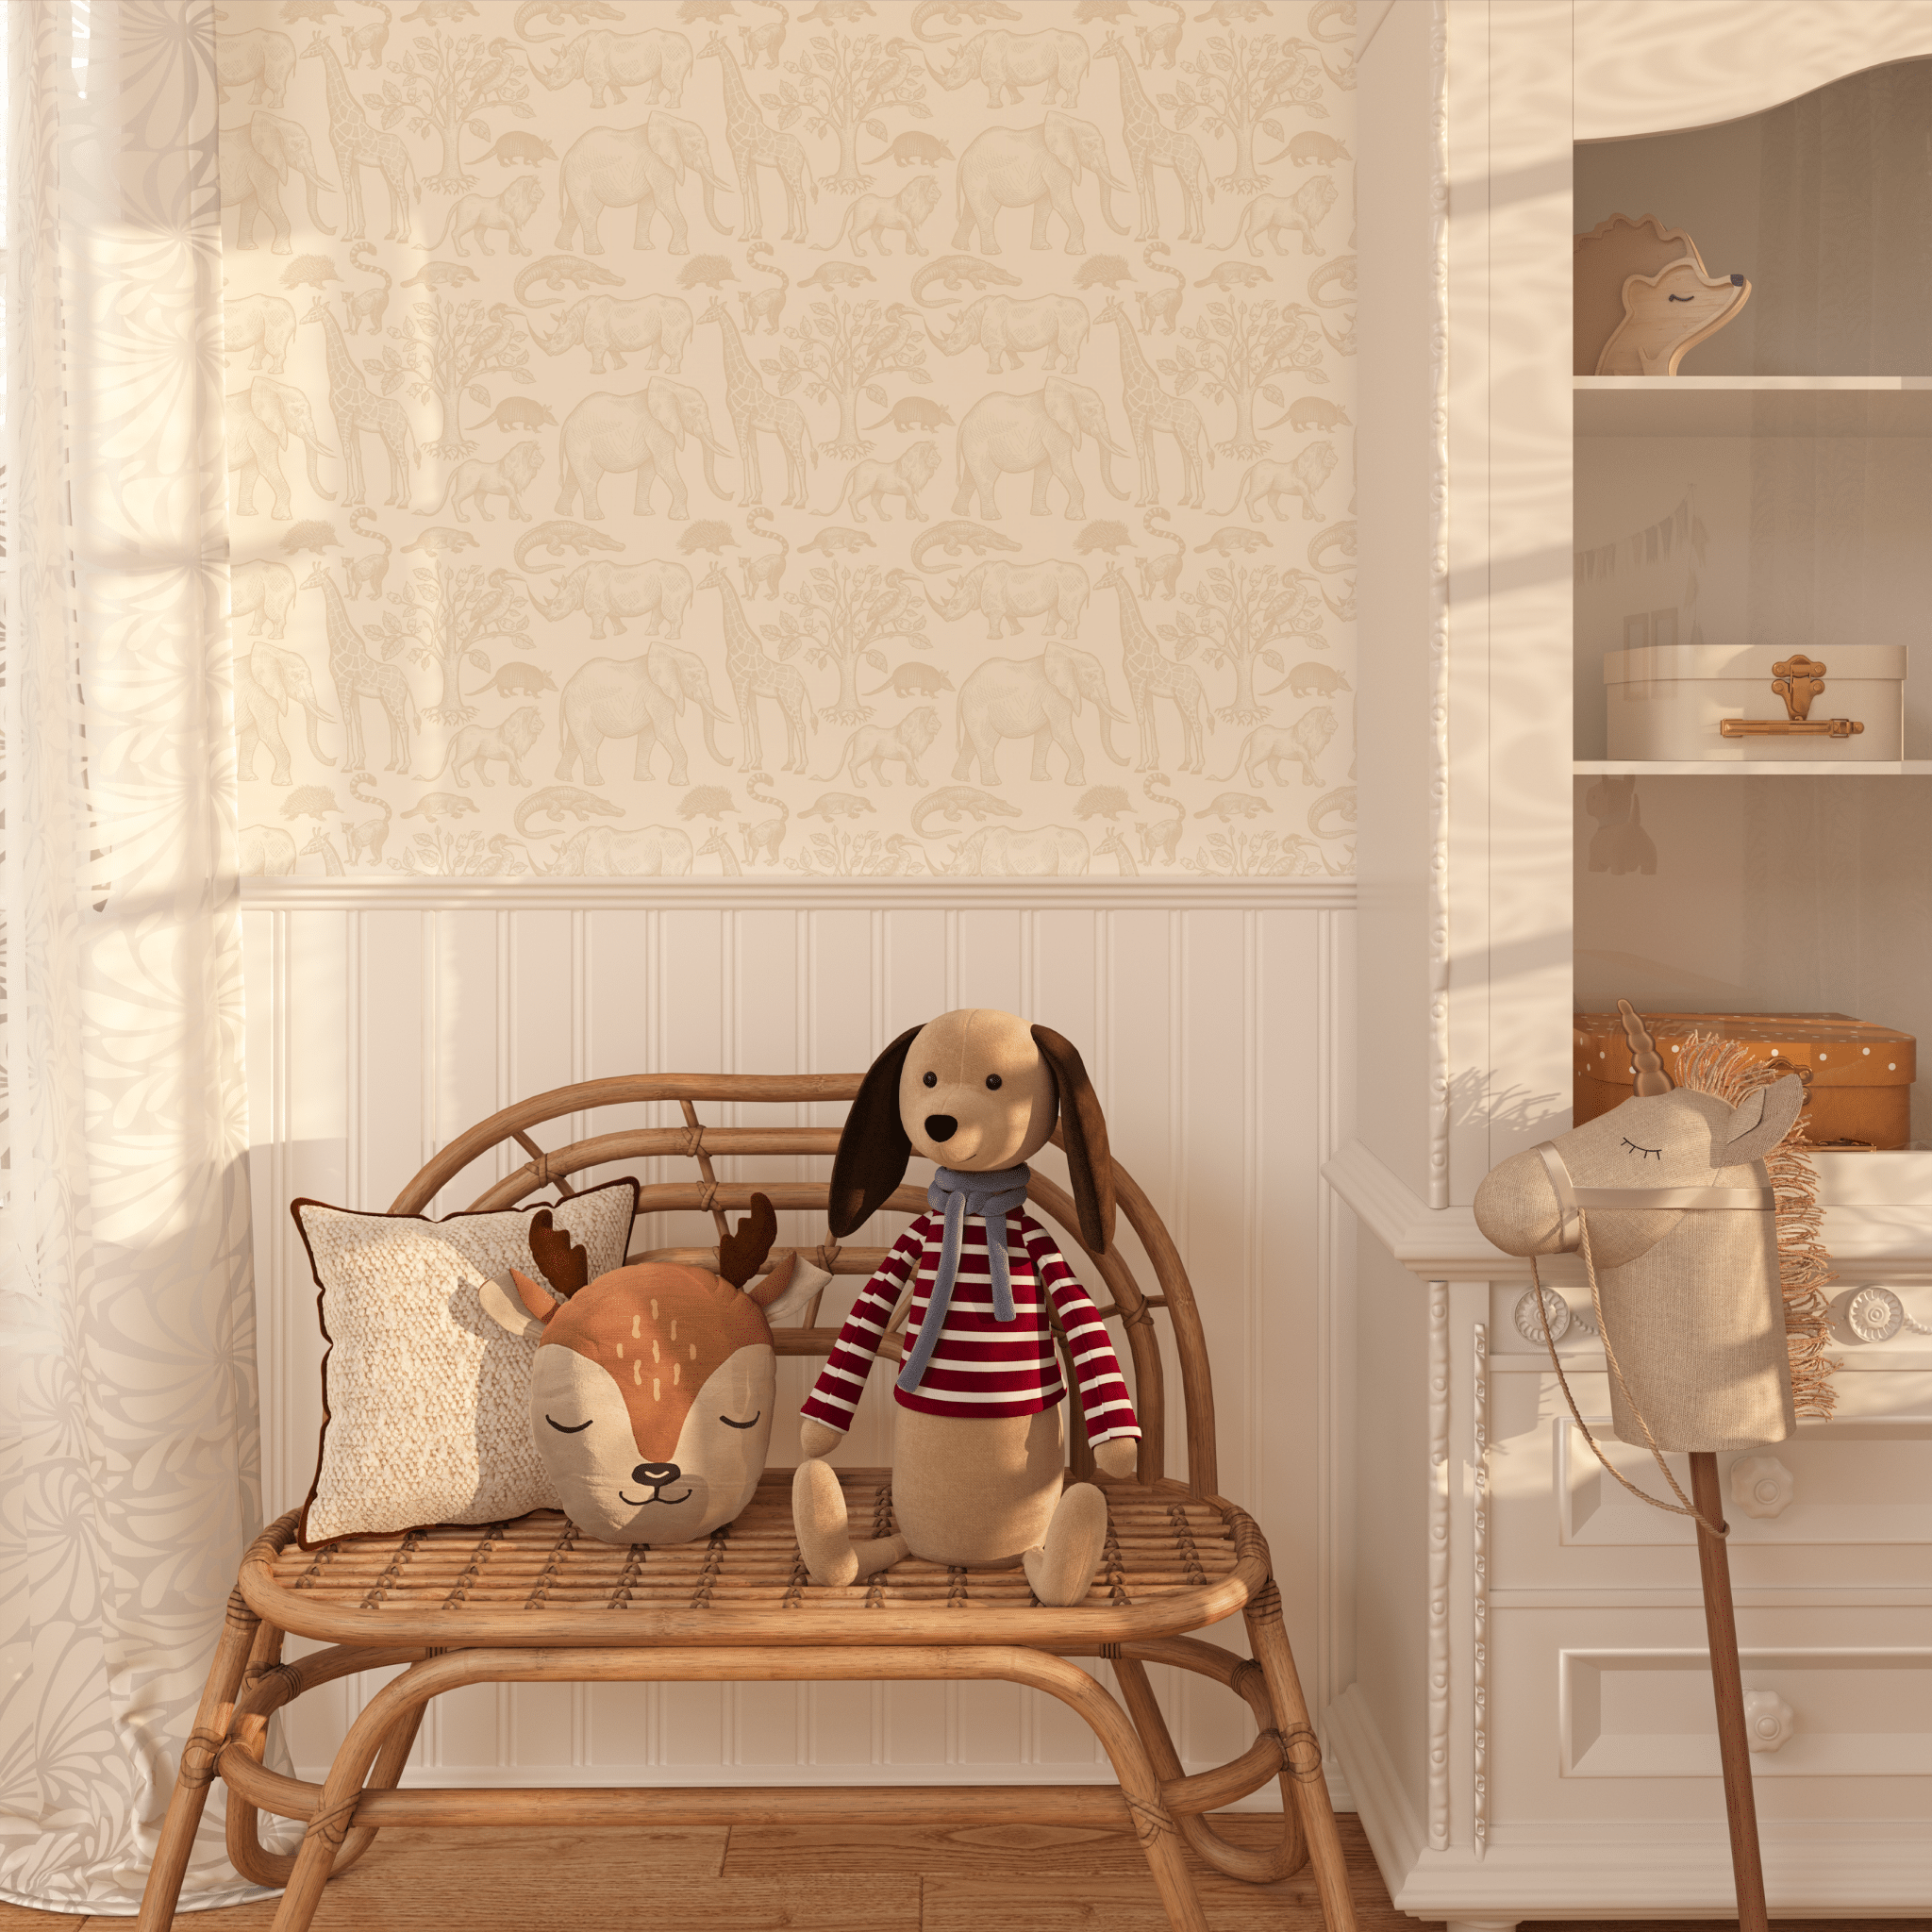 African Safari style wallpaper featuring wild animals in beige and white in a child's room.